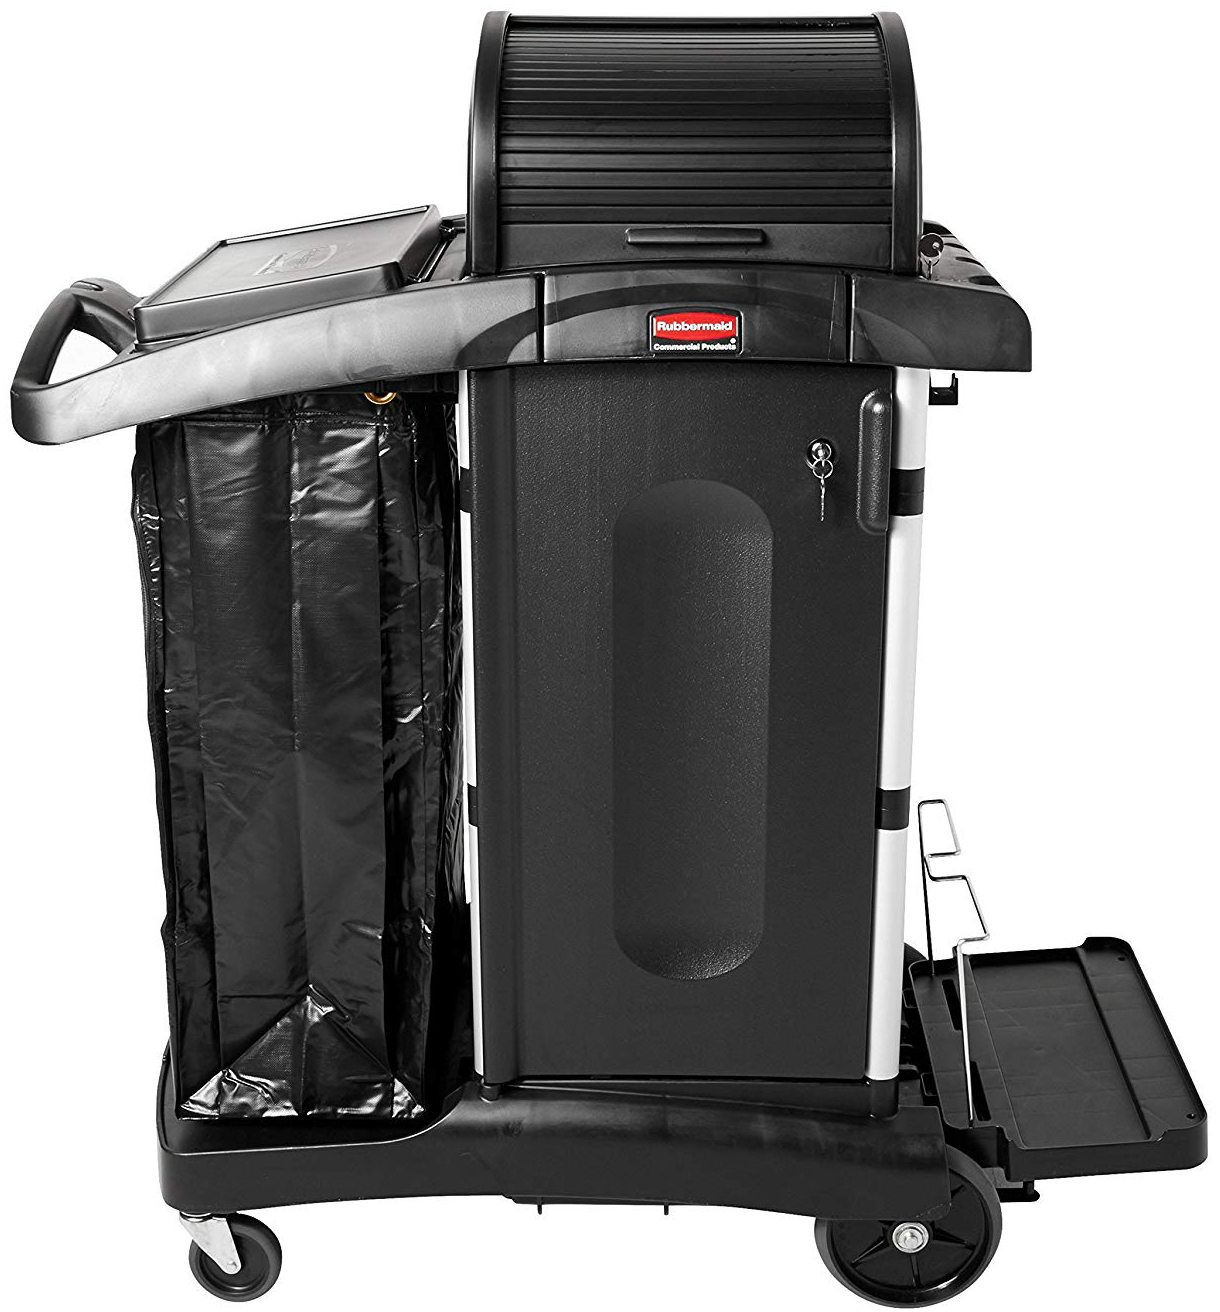 Rubbermaid® Executive Janitorial Cleaning Cart, High Security Doors,BK